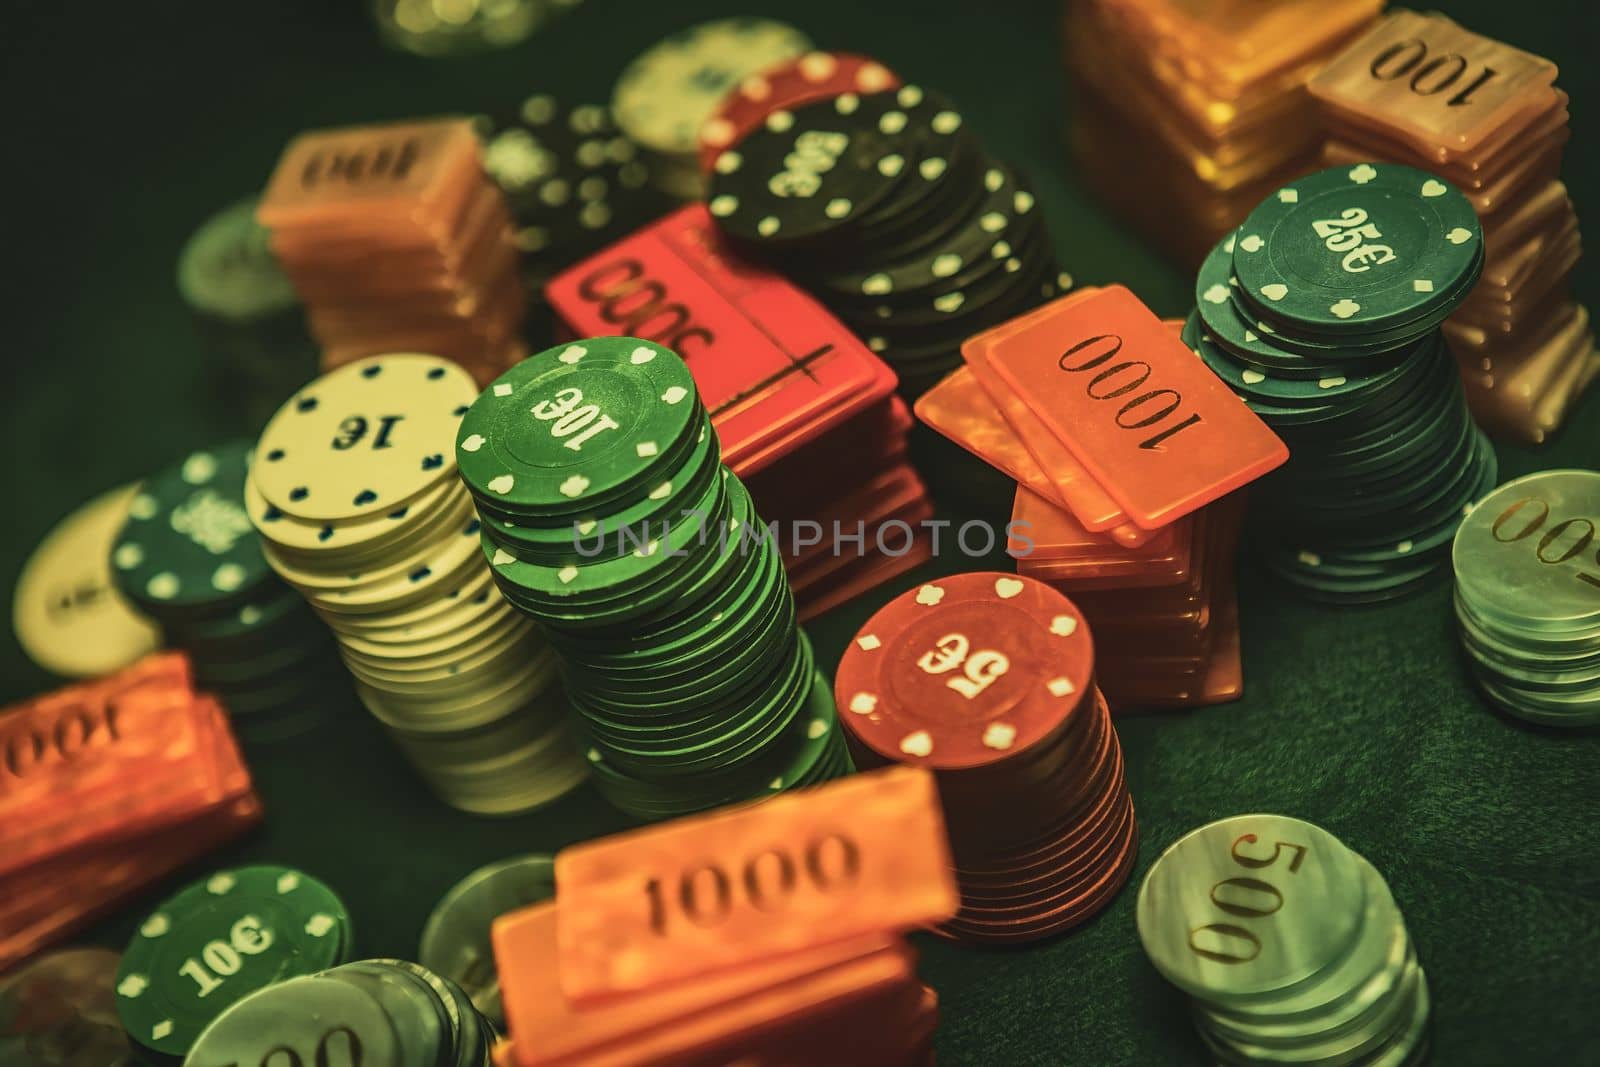 Poker chips are stacked neatly on a green textured table, the focus is on the chips with a shallow depth of field. The background is hazy with the smoke of cigars filling the room.